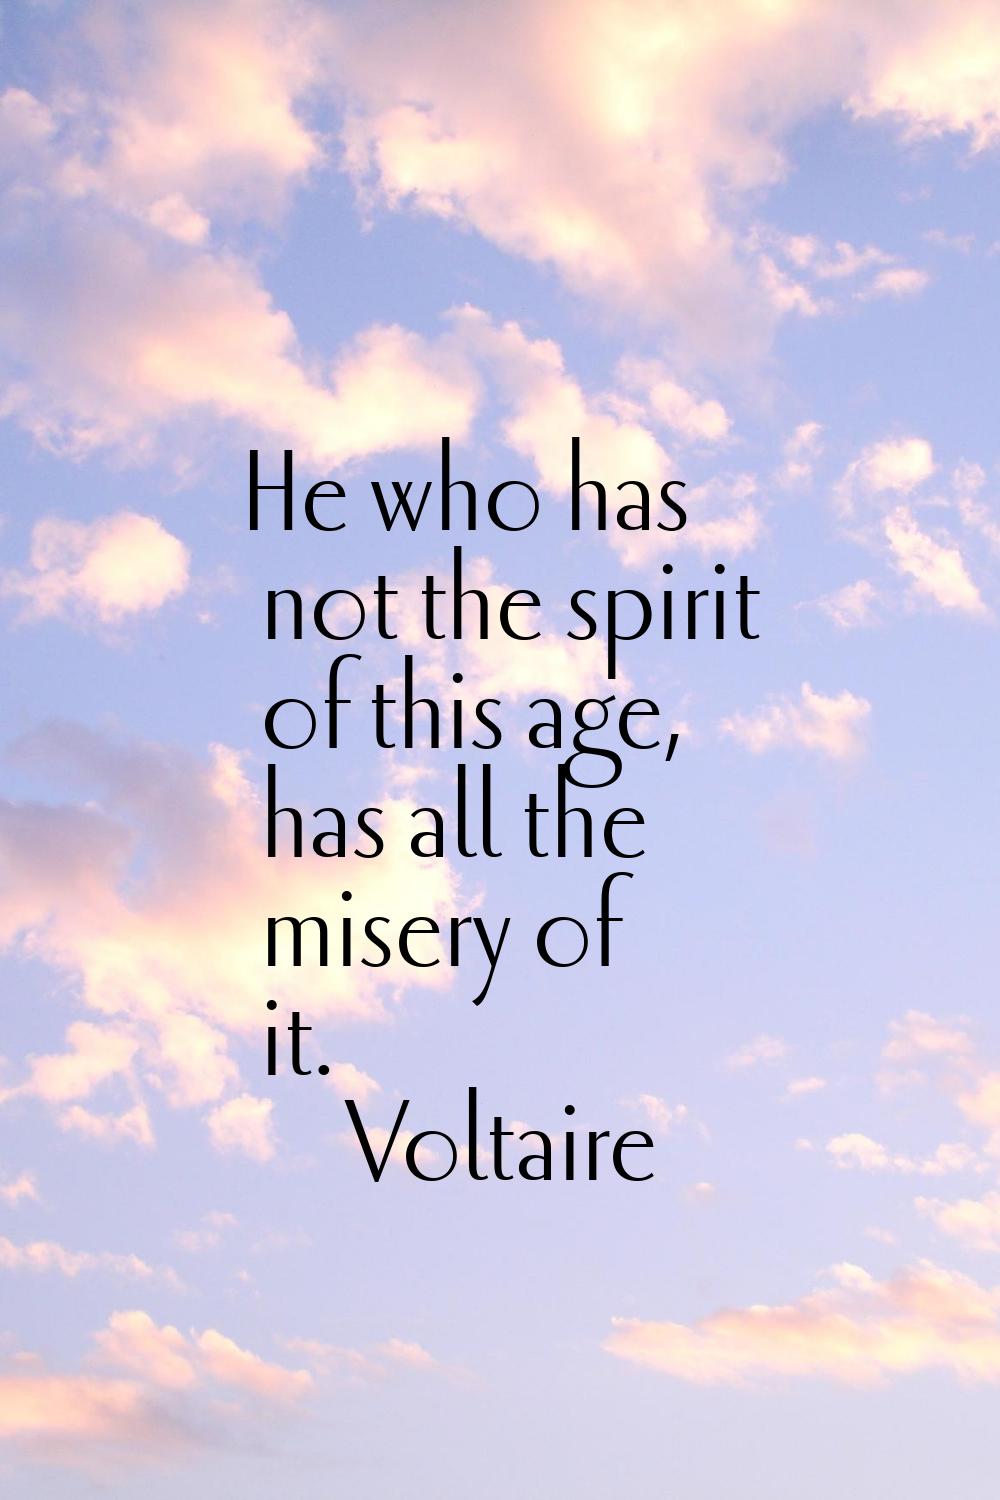 He who has not the spirit of this age, has all the misery of it.